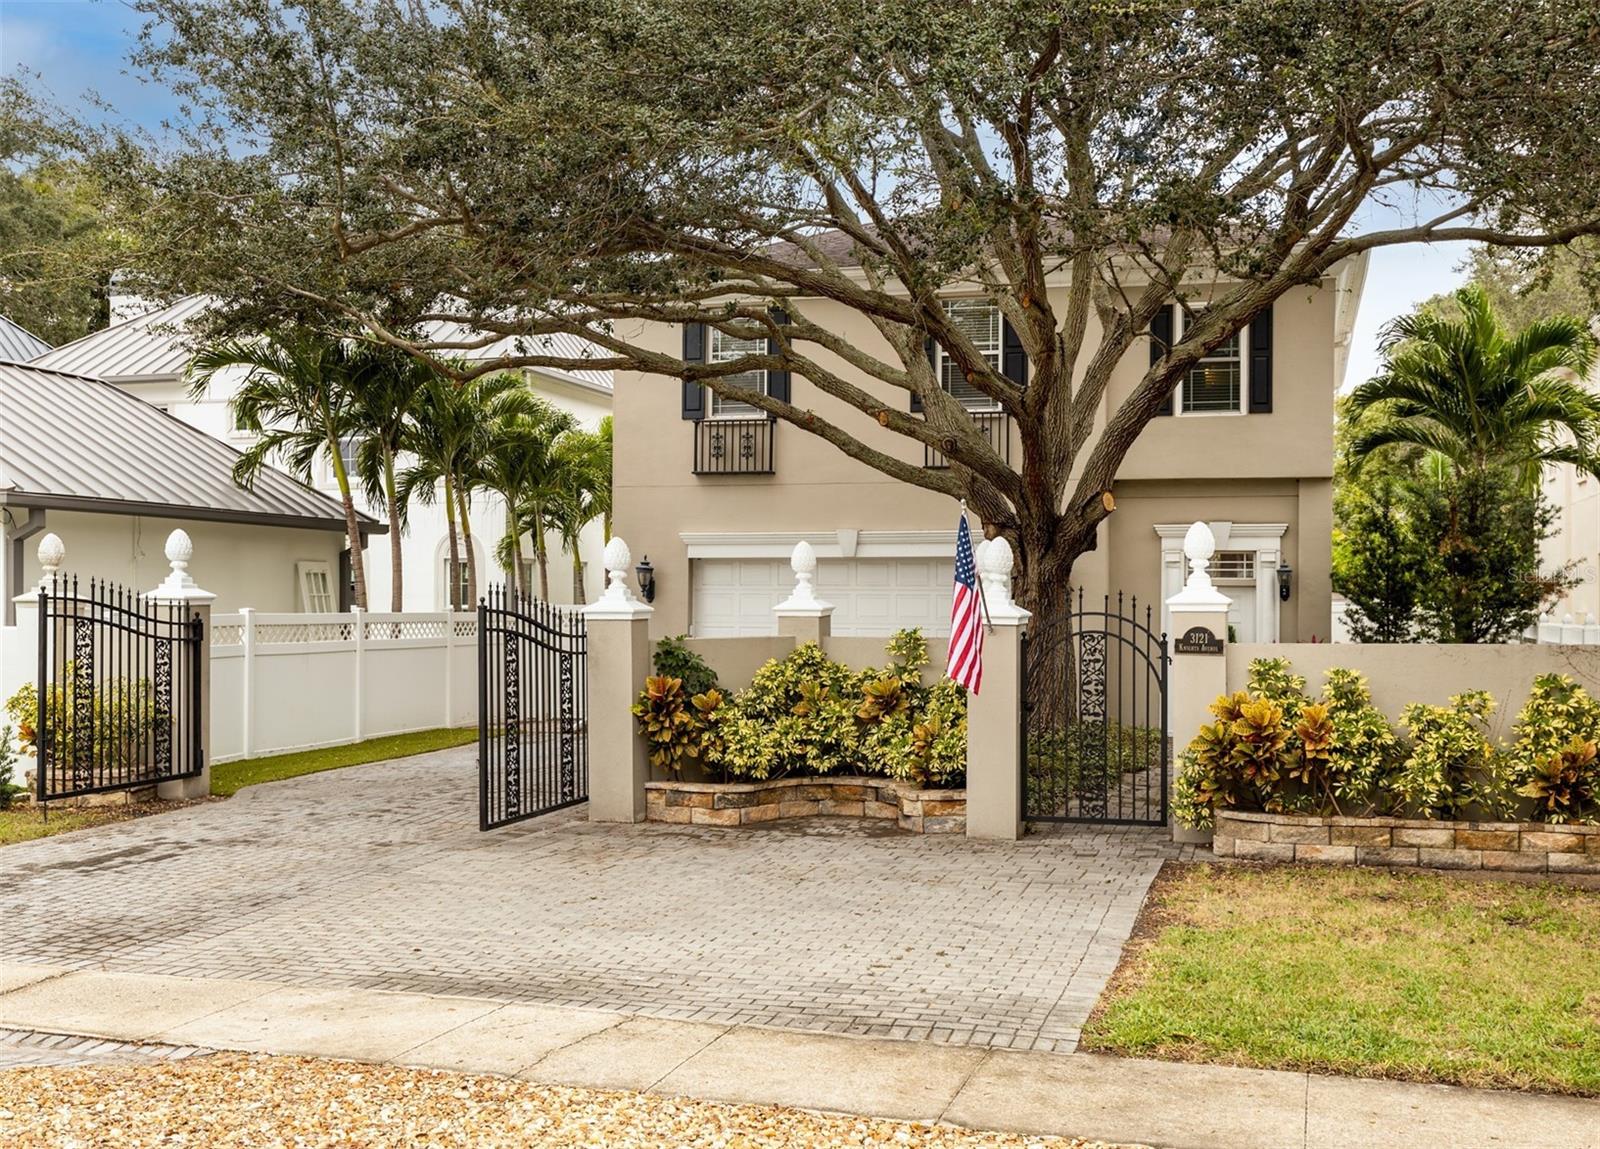 Welcome to 3121 W Knights Ave, nestled in the coveted neighborhood of Bayshore Beautiful.